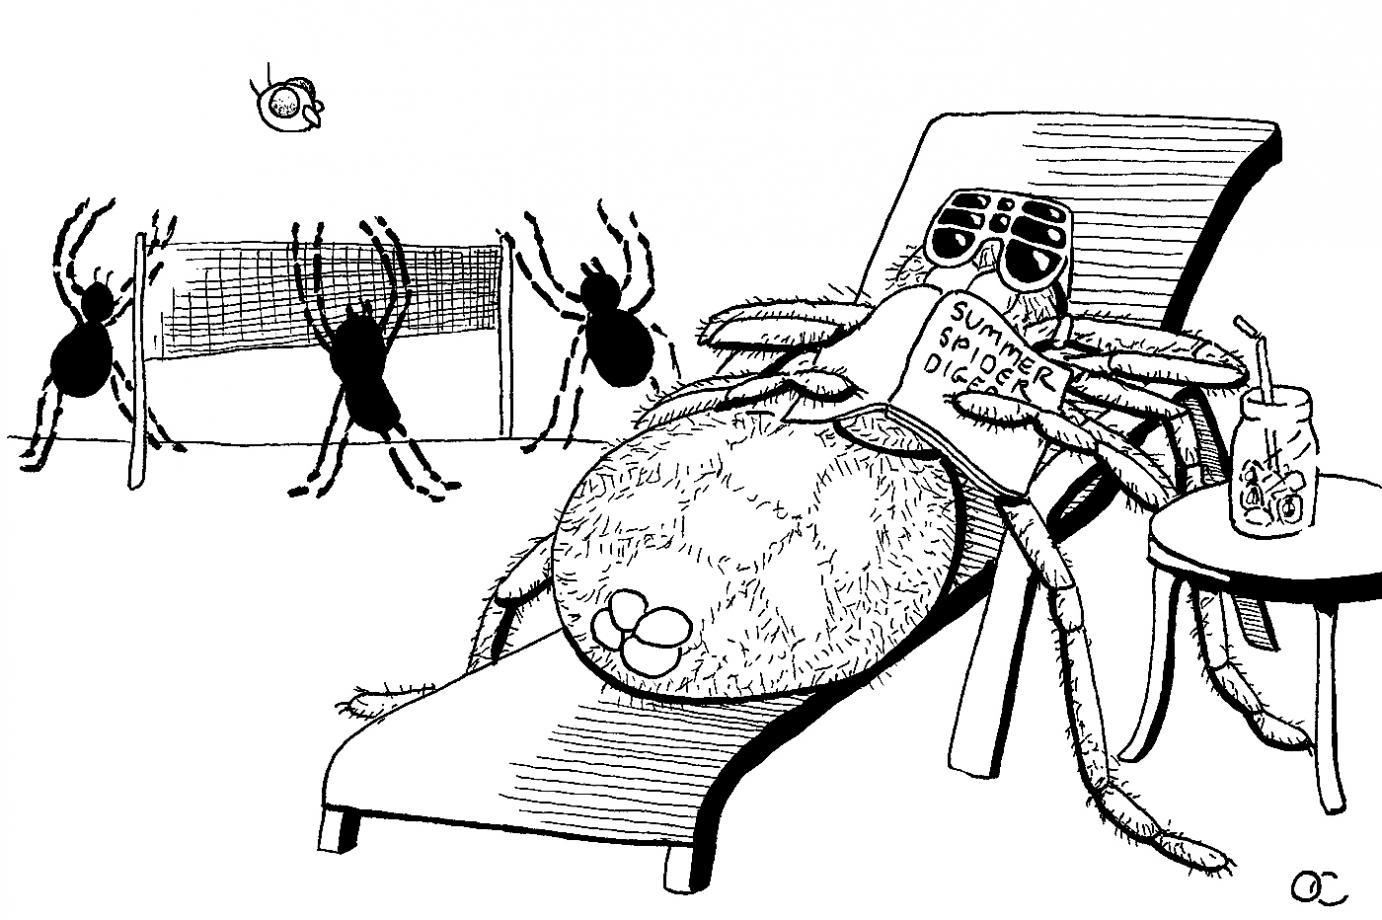 a comic showing a spider lounging in the sun with sunglasses on